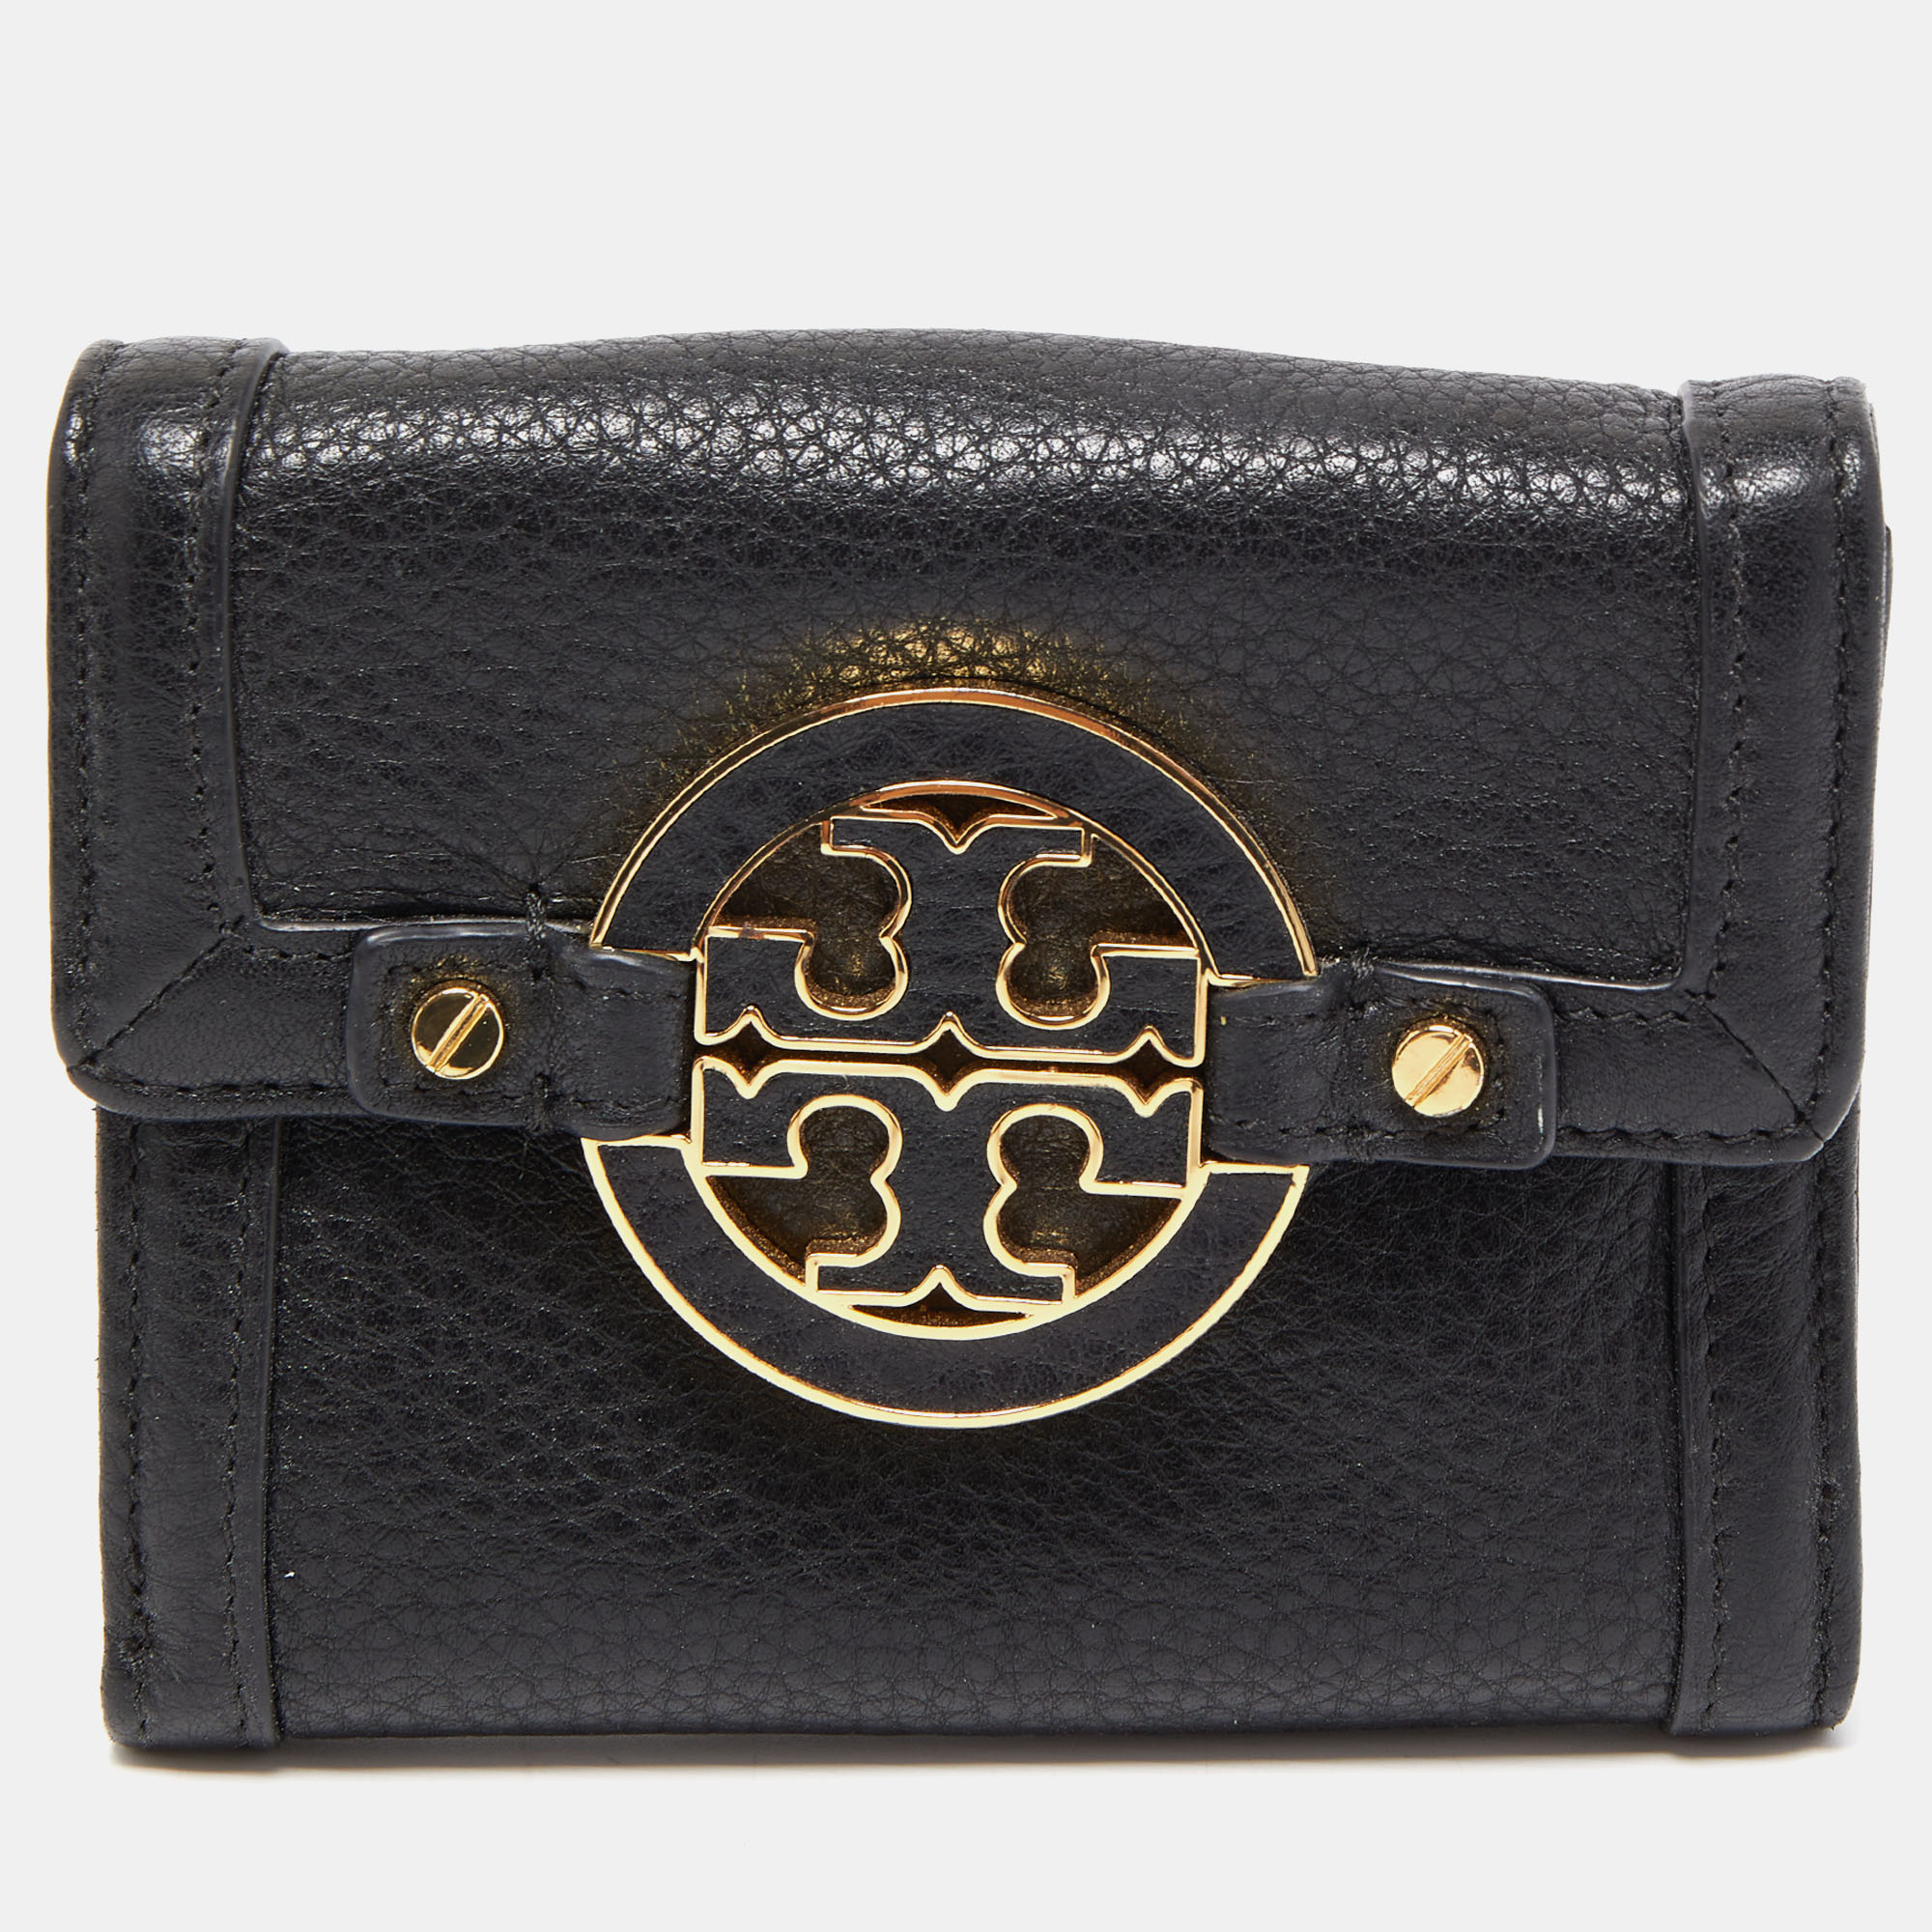 Pre-owned Tory Burch Black Leather Amanda Compact Wallet